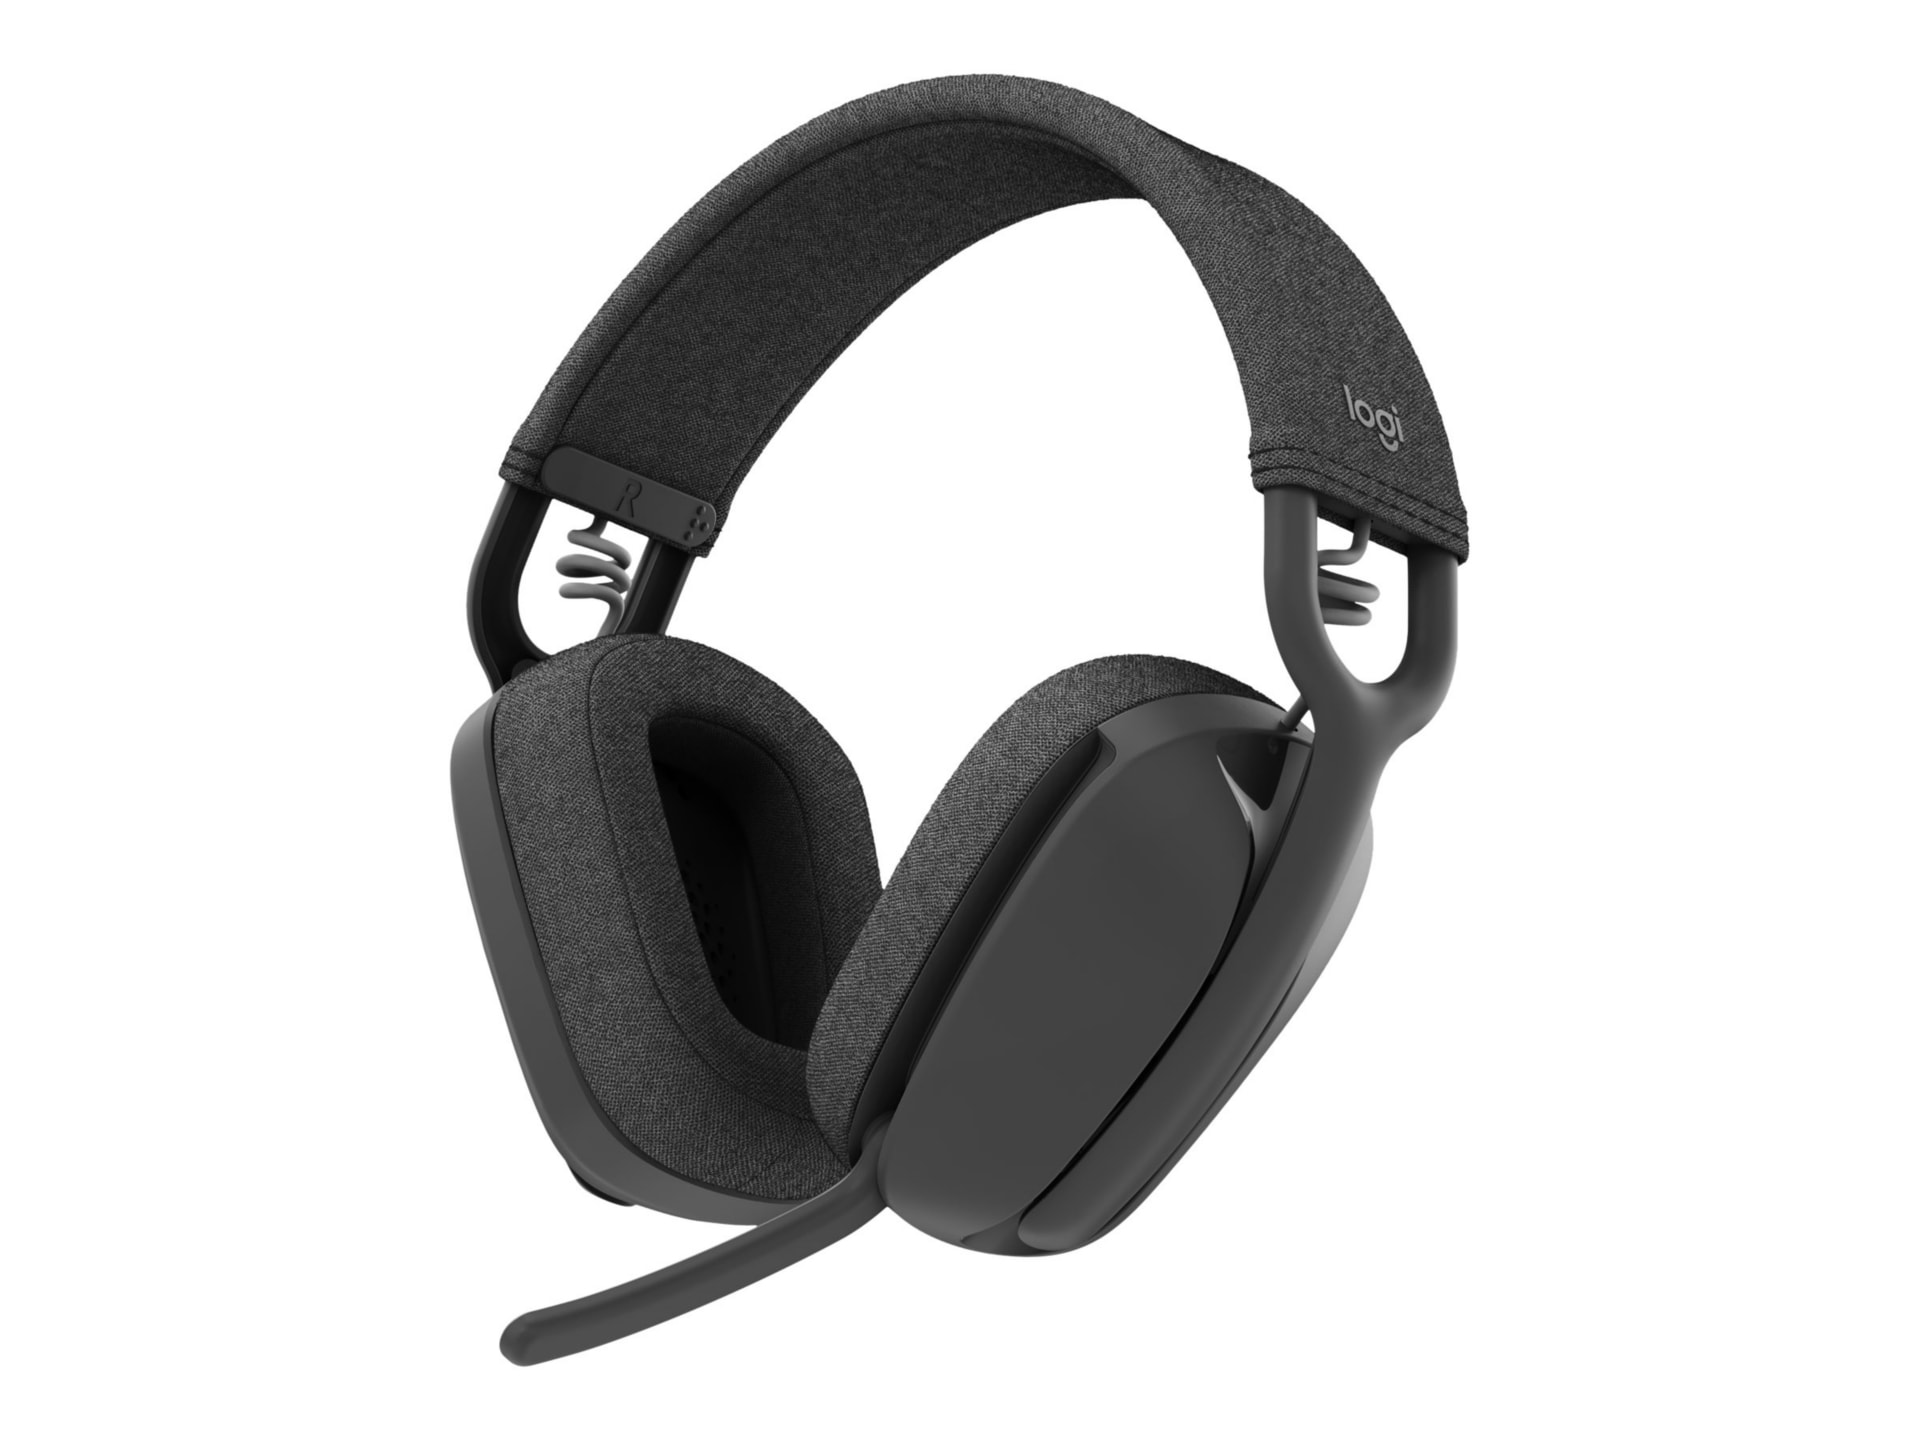 Logitech Zone Vibe Zone Vibe Wireless Bluetooth headphones with noise-cance